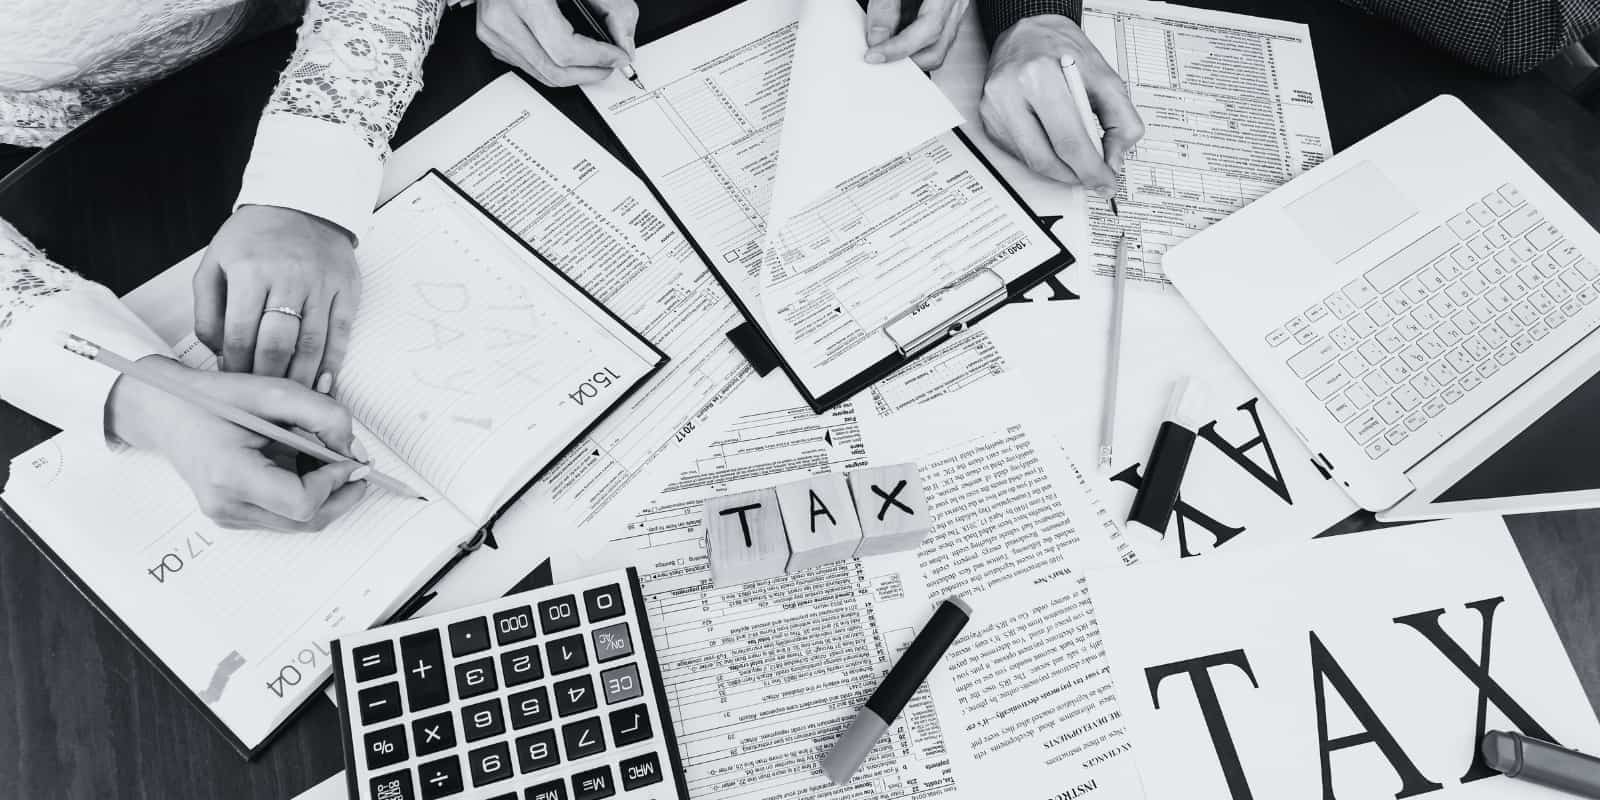 How Does A Business Tax Management Consultant Help In Minimizing Tax Liabilities For Corporations?